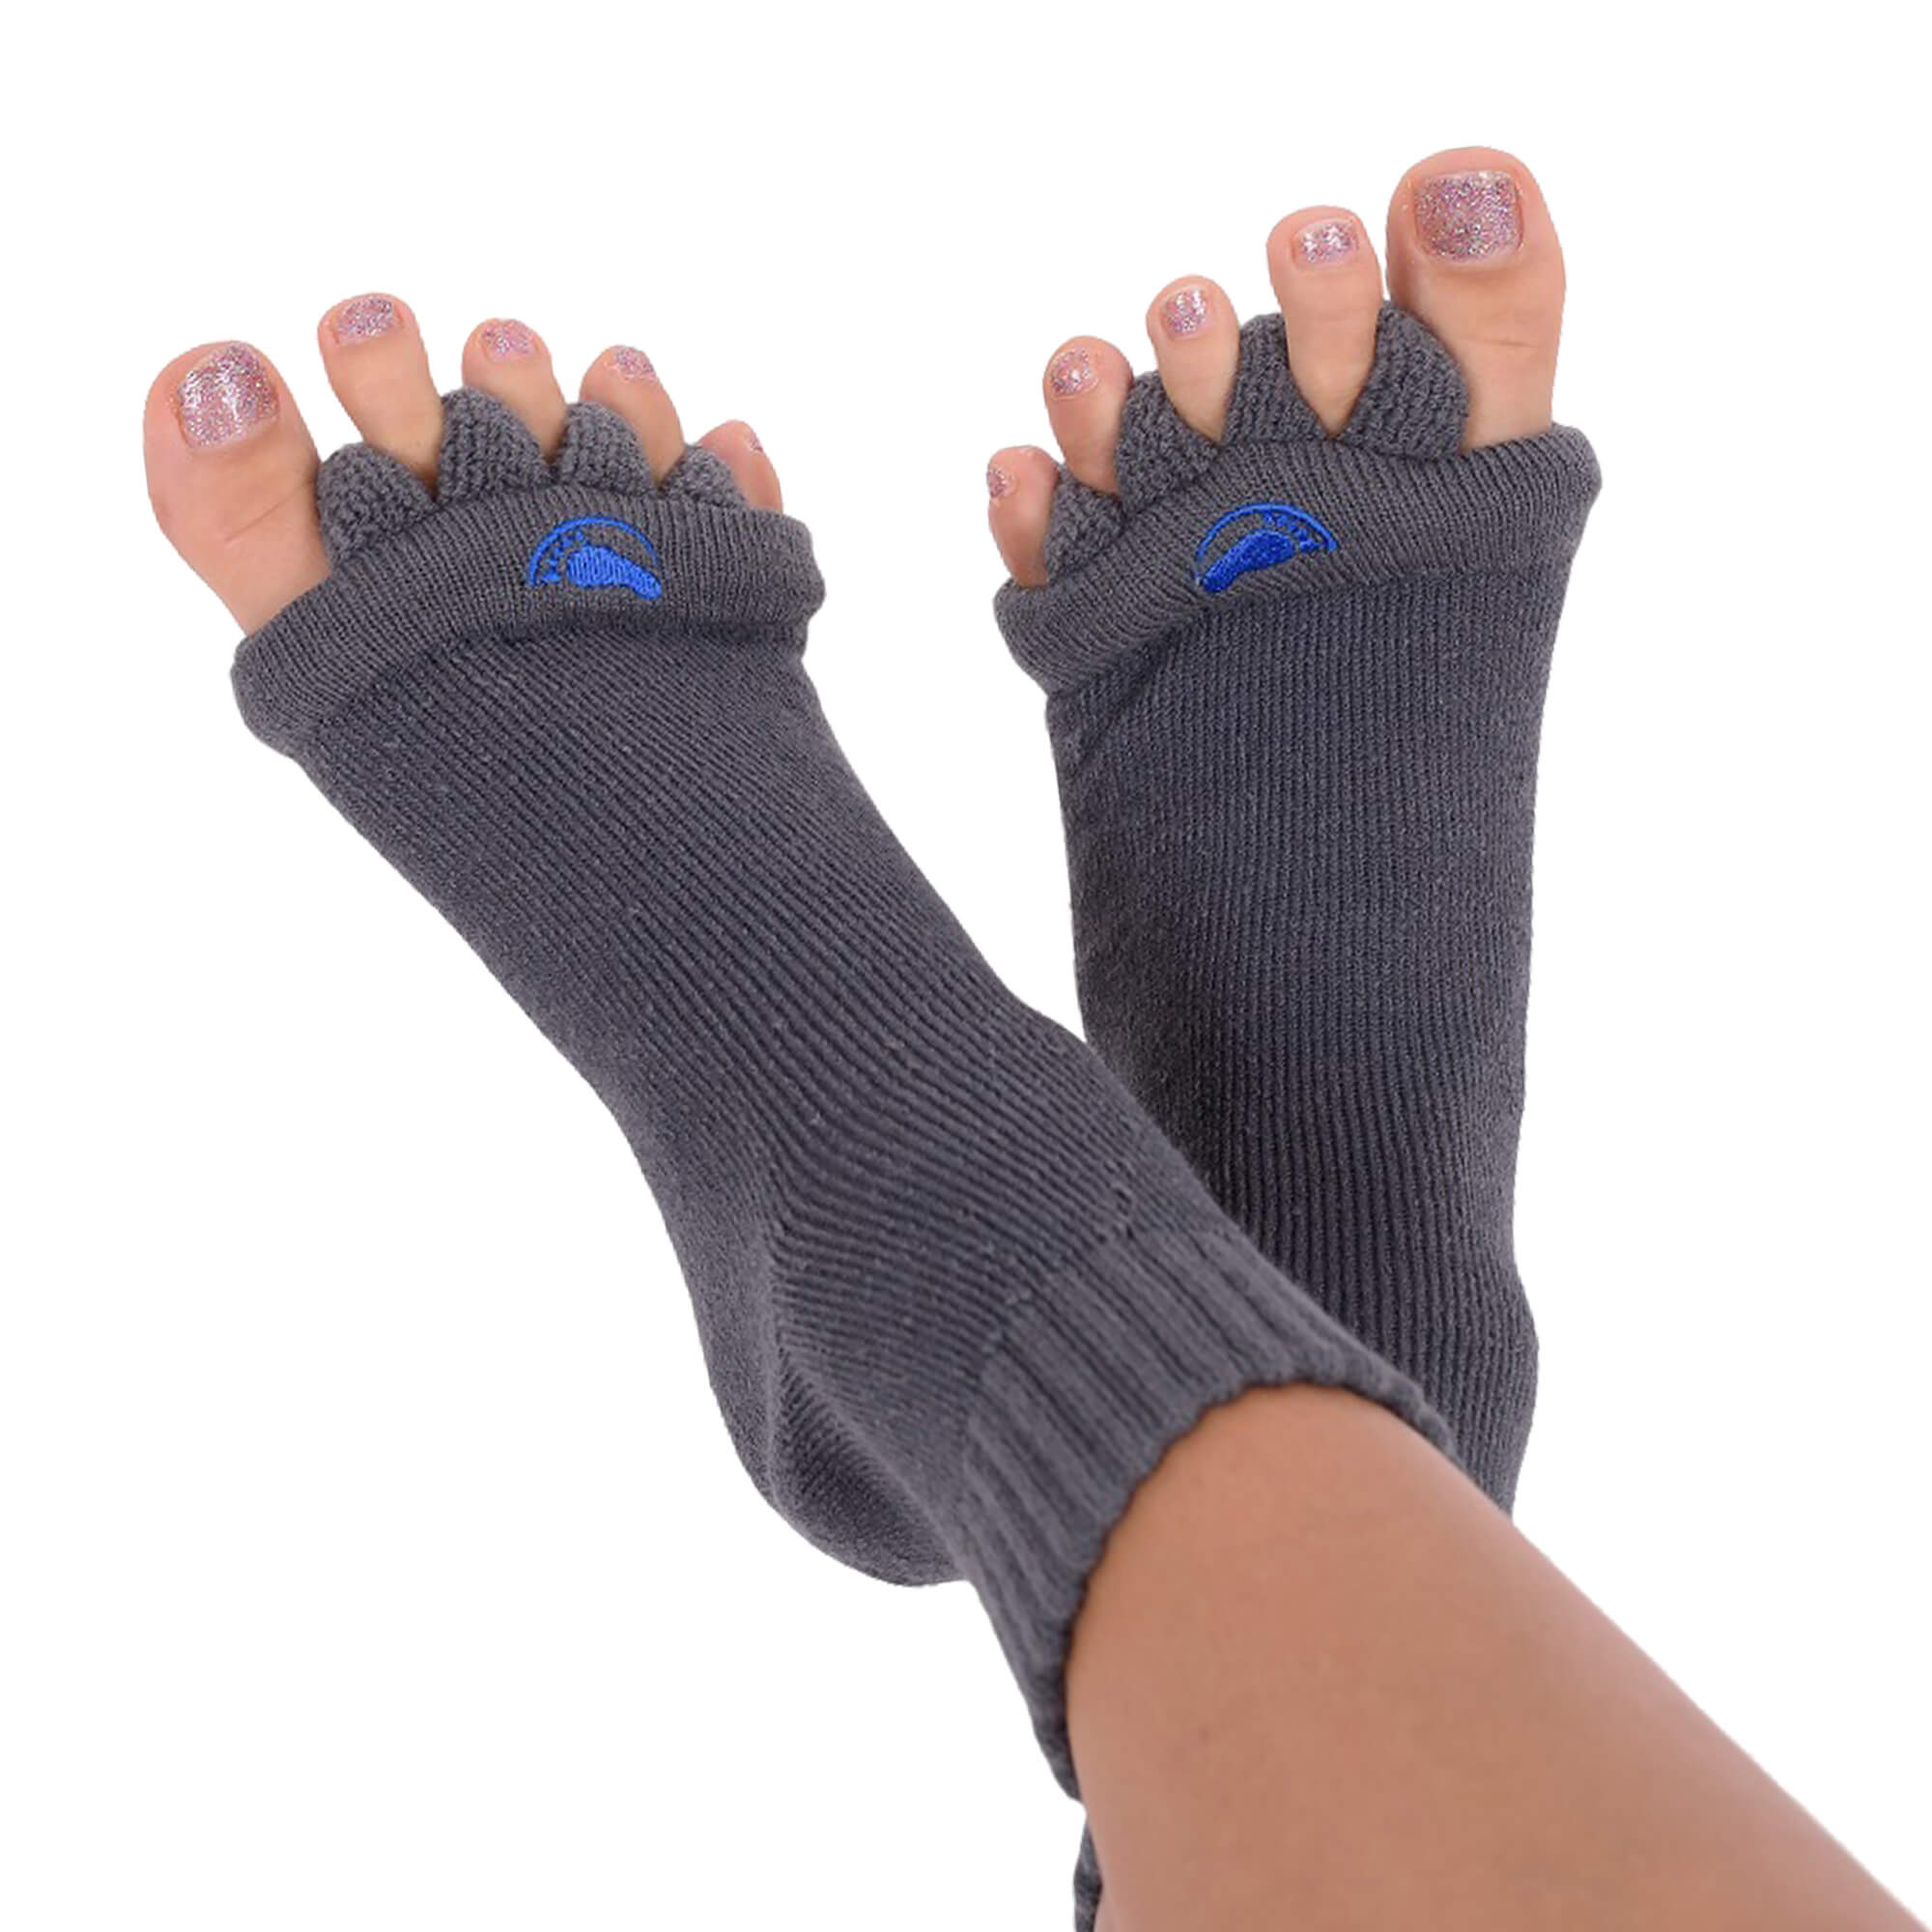 My-Happy Feet - Foot pain relief for common foot pain – My-Happy Feet - The Original  Foot Alignment Socks